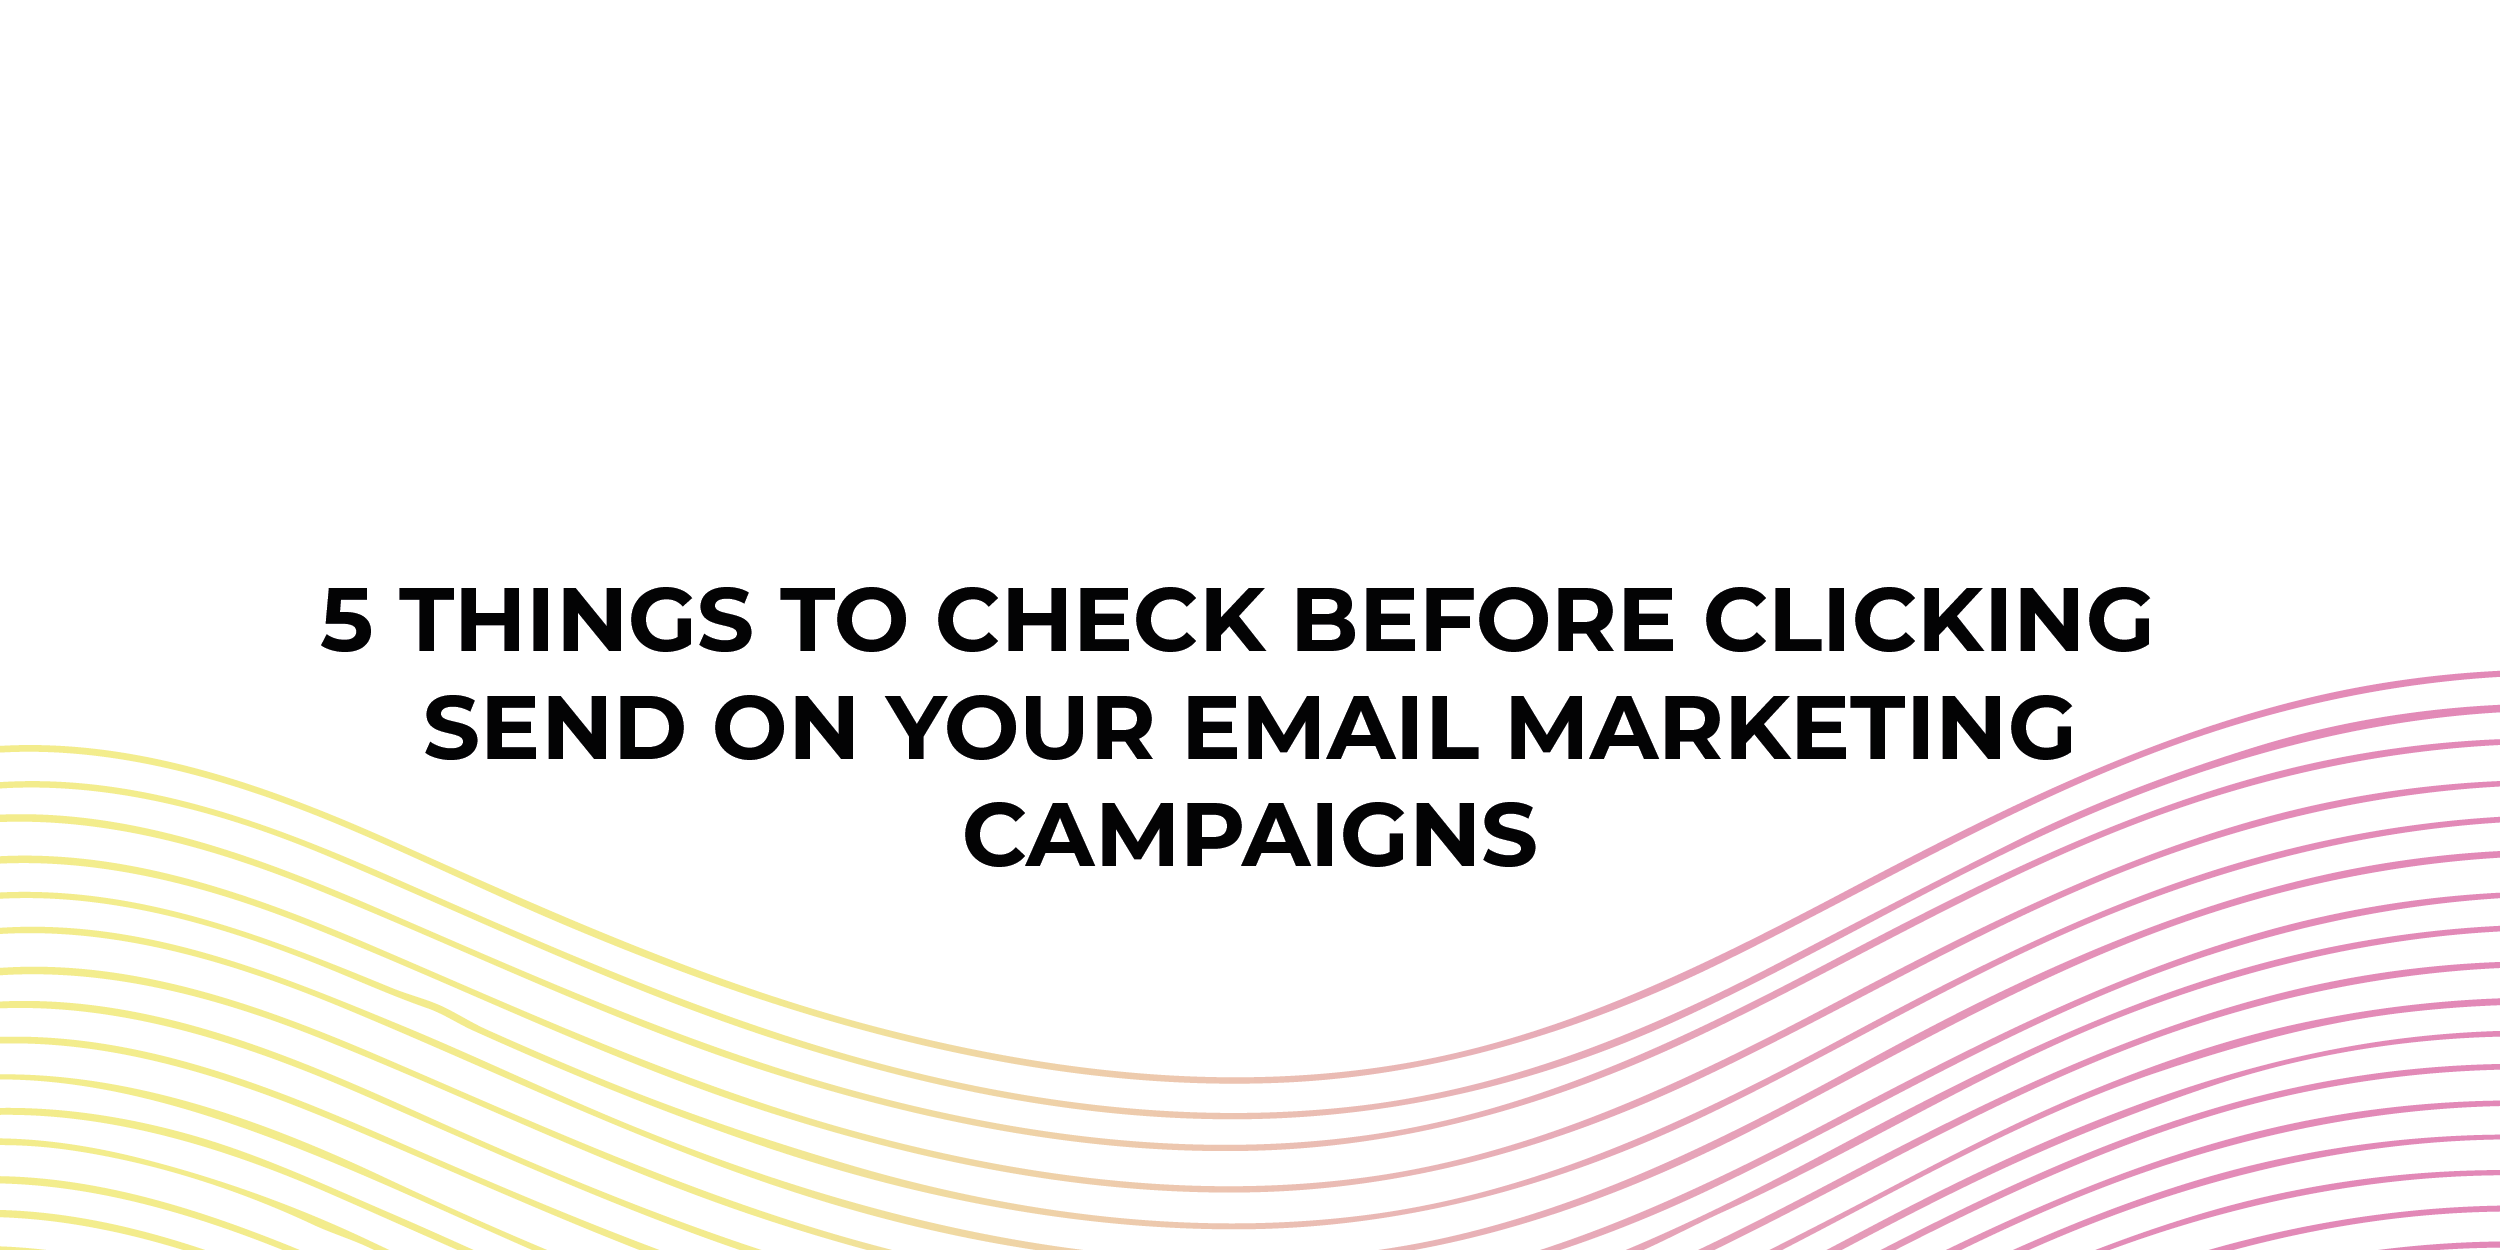 5 Important Things to Check Before Clicking Send On Your Email Marketing Campaigns